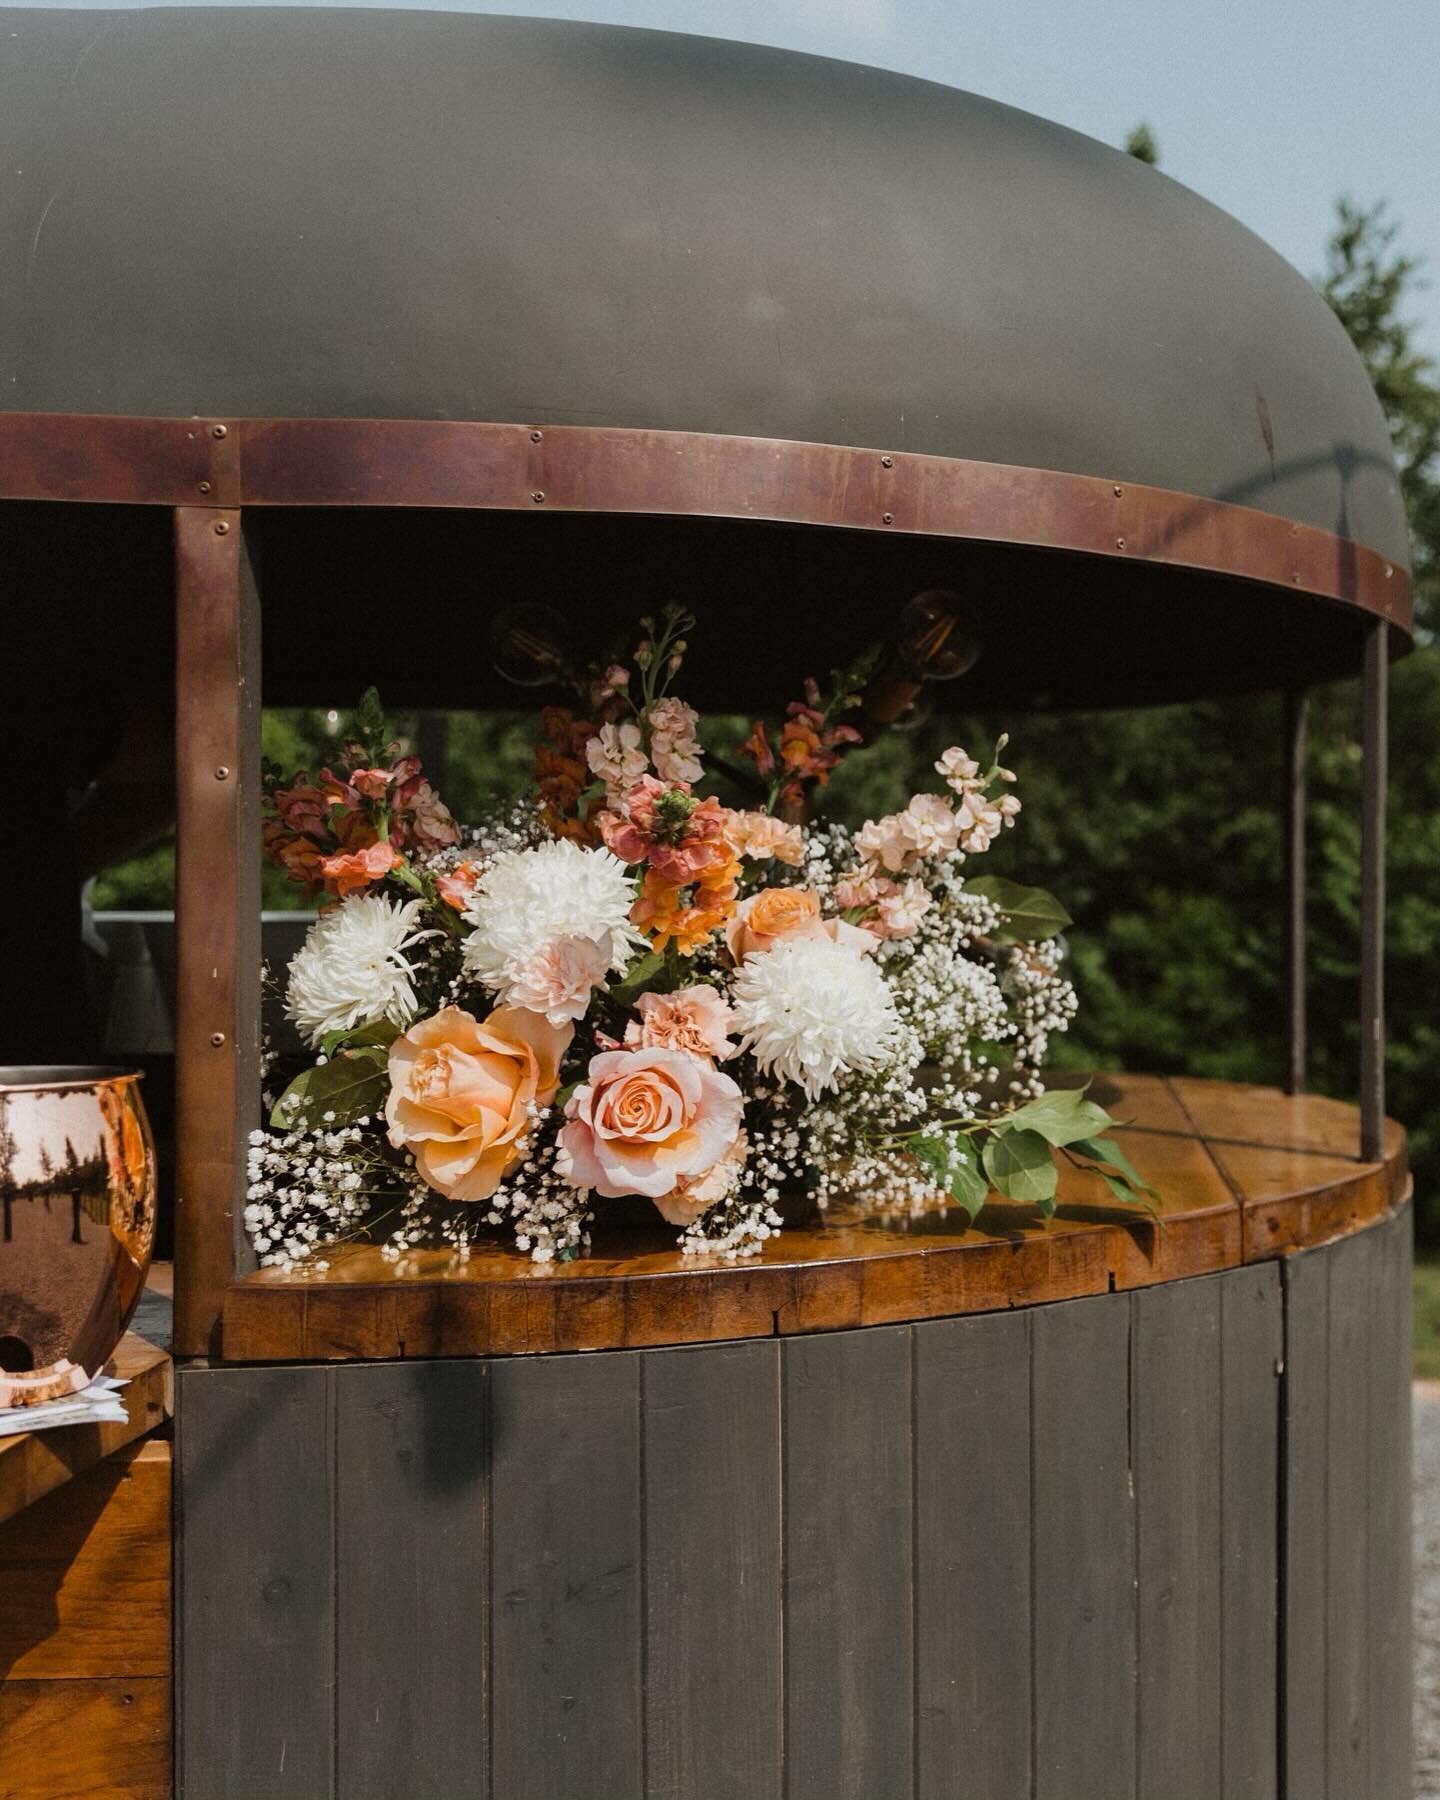 DETAILS✨DETAILS✨ DETAILS

We love when our couples decide to throw some small details such as cute bar signs, florals, etc. to the bar! It ads such a unique touch to match the aesthetic of the event! 

Don&rsquo;t forget to BOOK with us for your upco